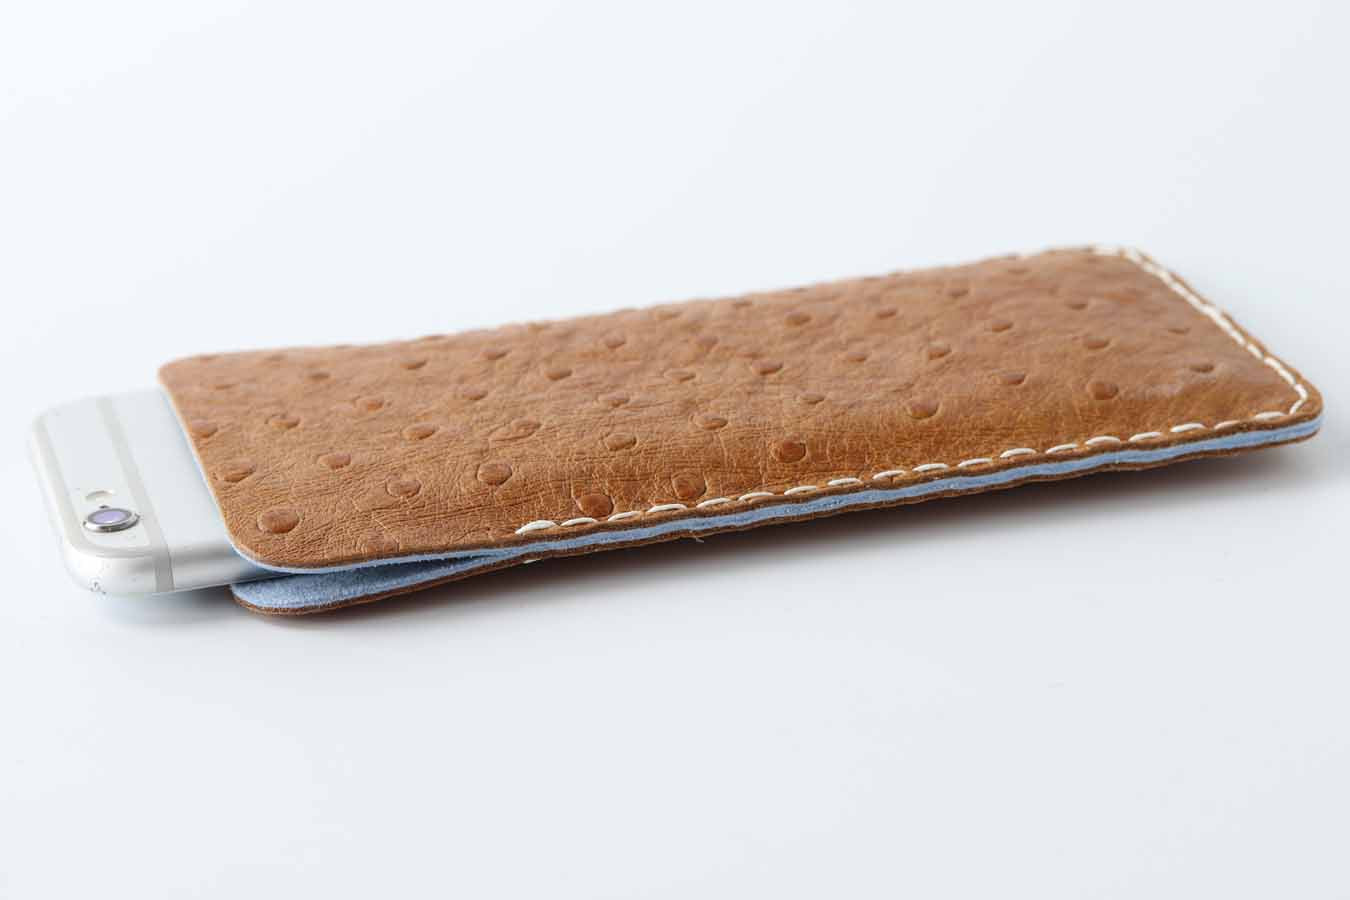 iPhone Ostrich leather sleeve, pouch, case 